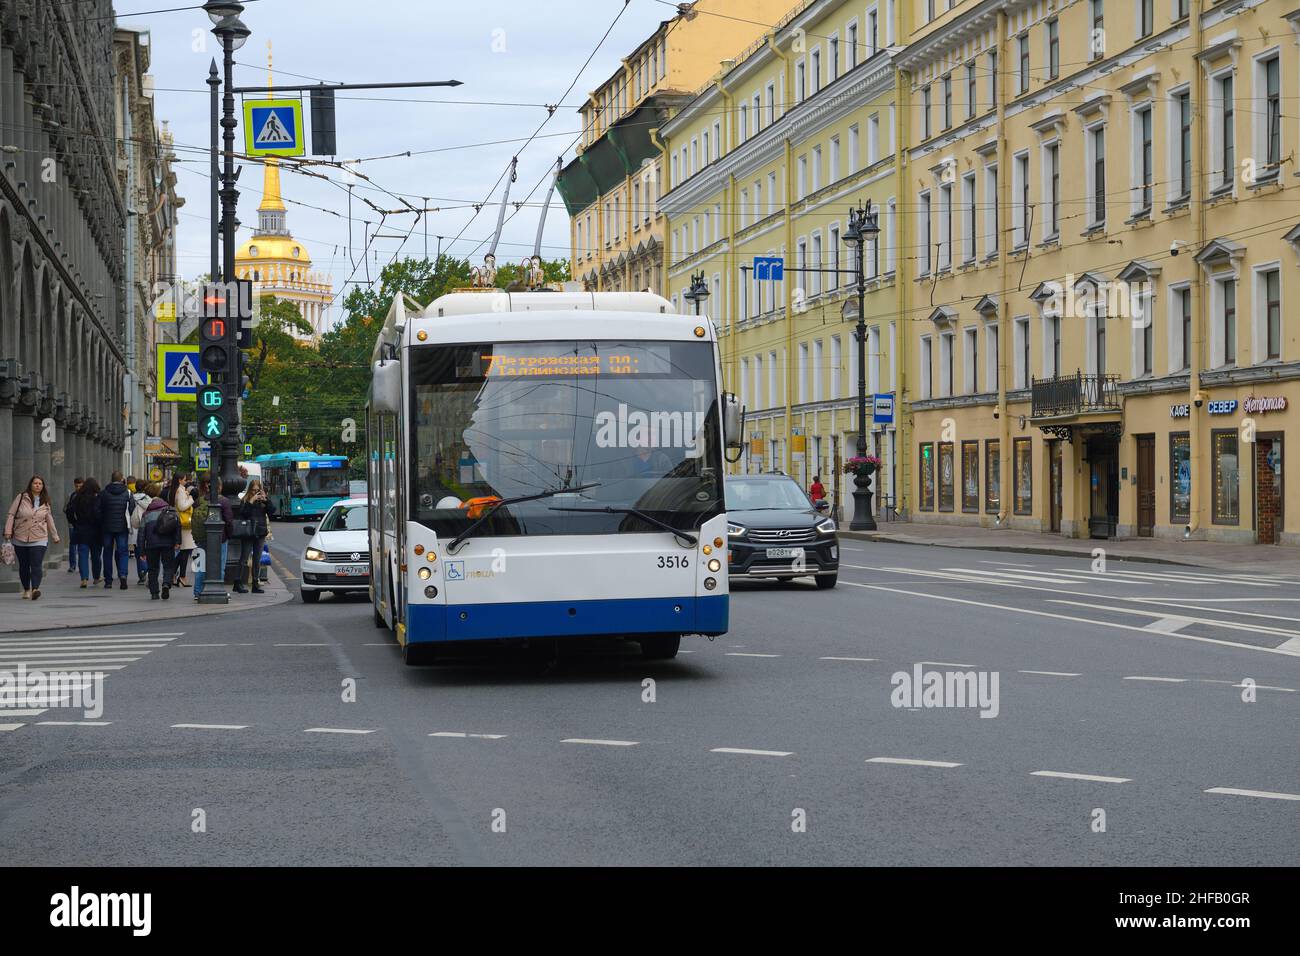 ST. PETERSBURG, RUSSIA - SEPTEMBER 09, 2021: Trolleybus Trolza-5265 'Megapolis' route No. 7 on Nevsky Prospekt on a cloudy September afternoon Stock Photo